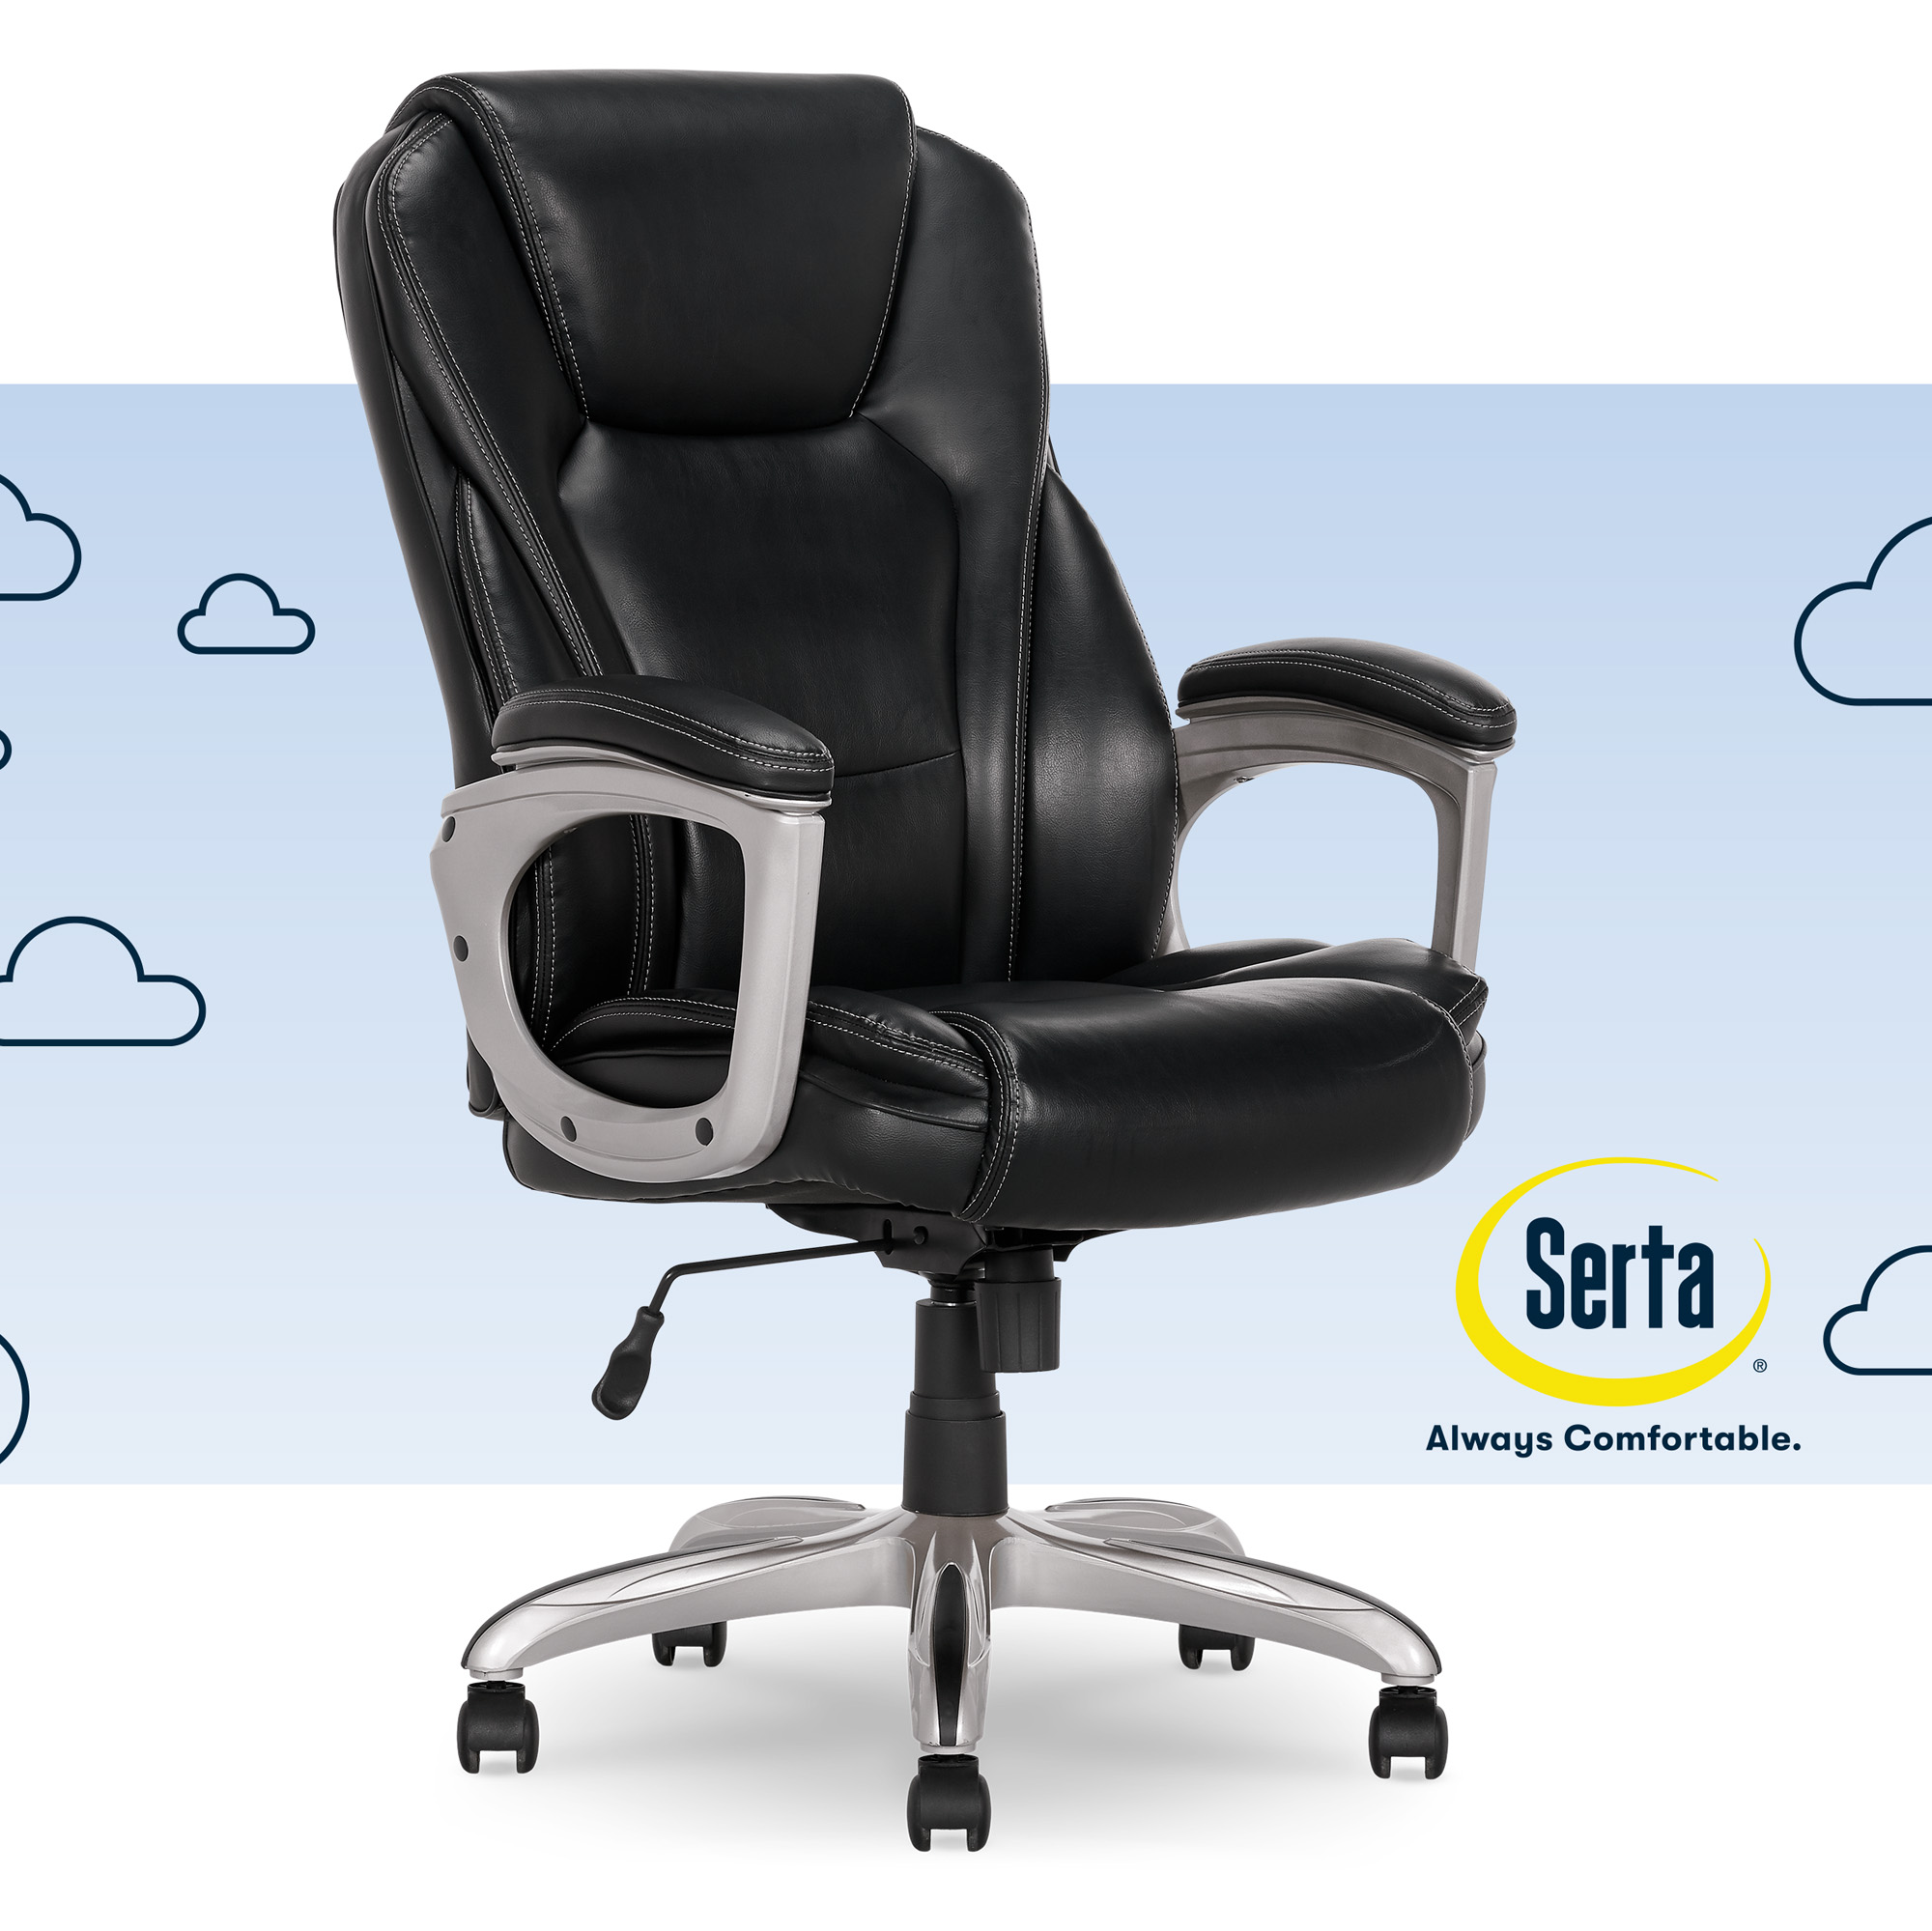 Serta Heavy-Duty Bonded Leather Commercial Office Chair with Memory Foam, 350 lb capacity, Black - image 1 of 9